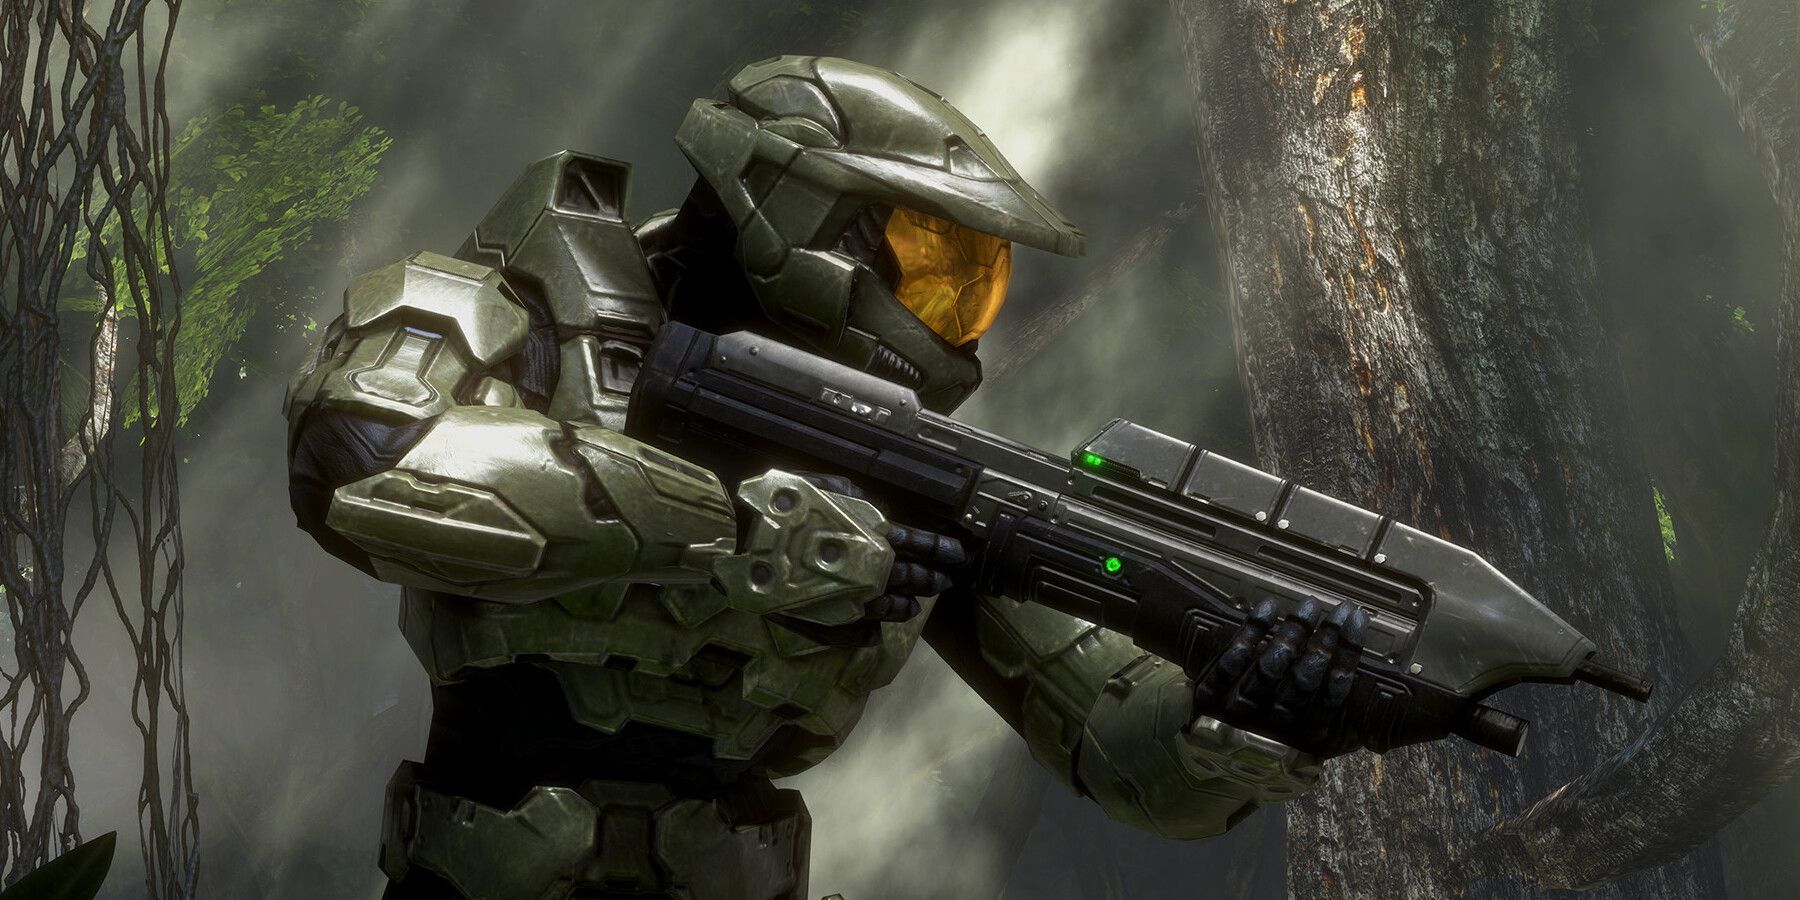 Best Final Missions In Halo Games